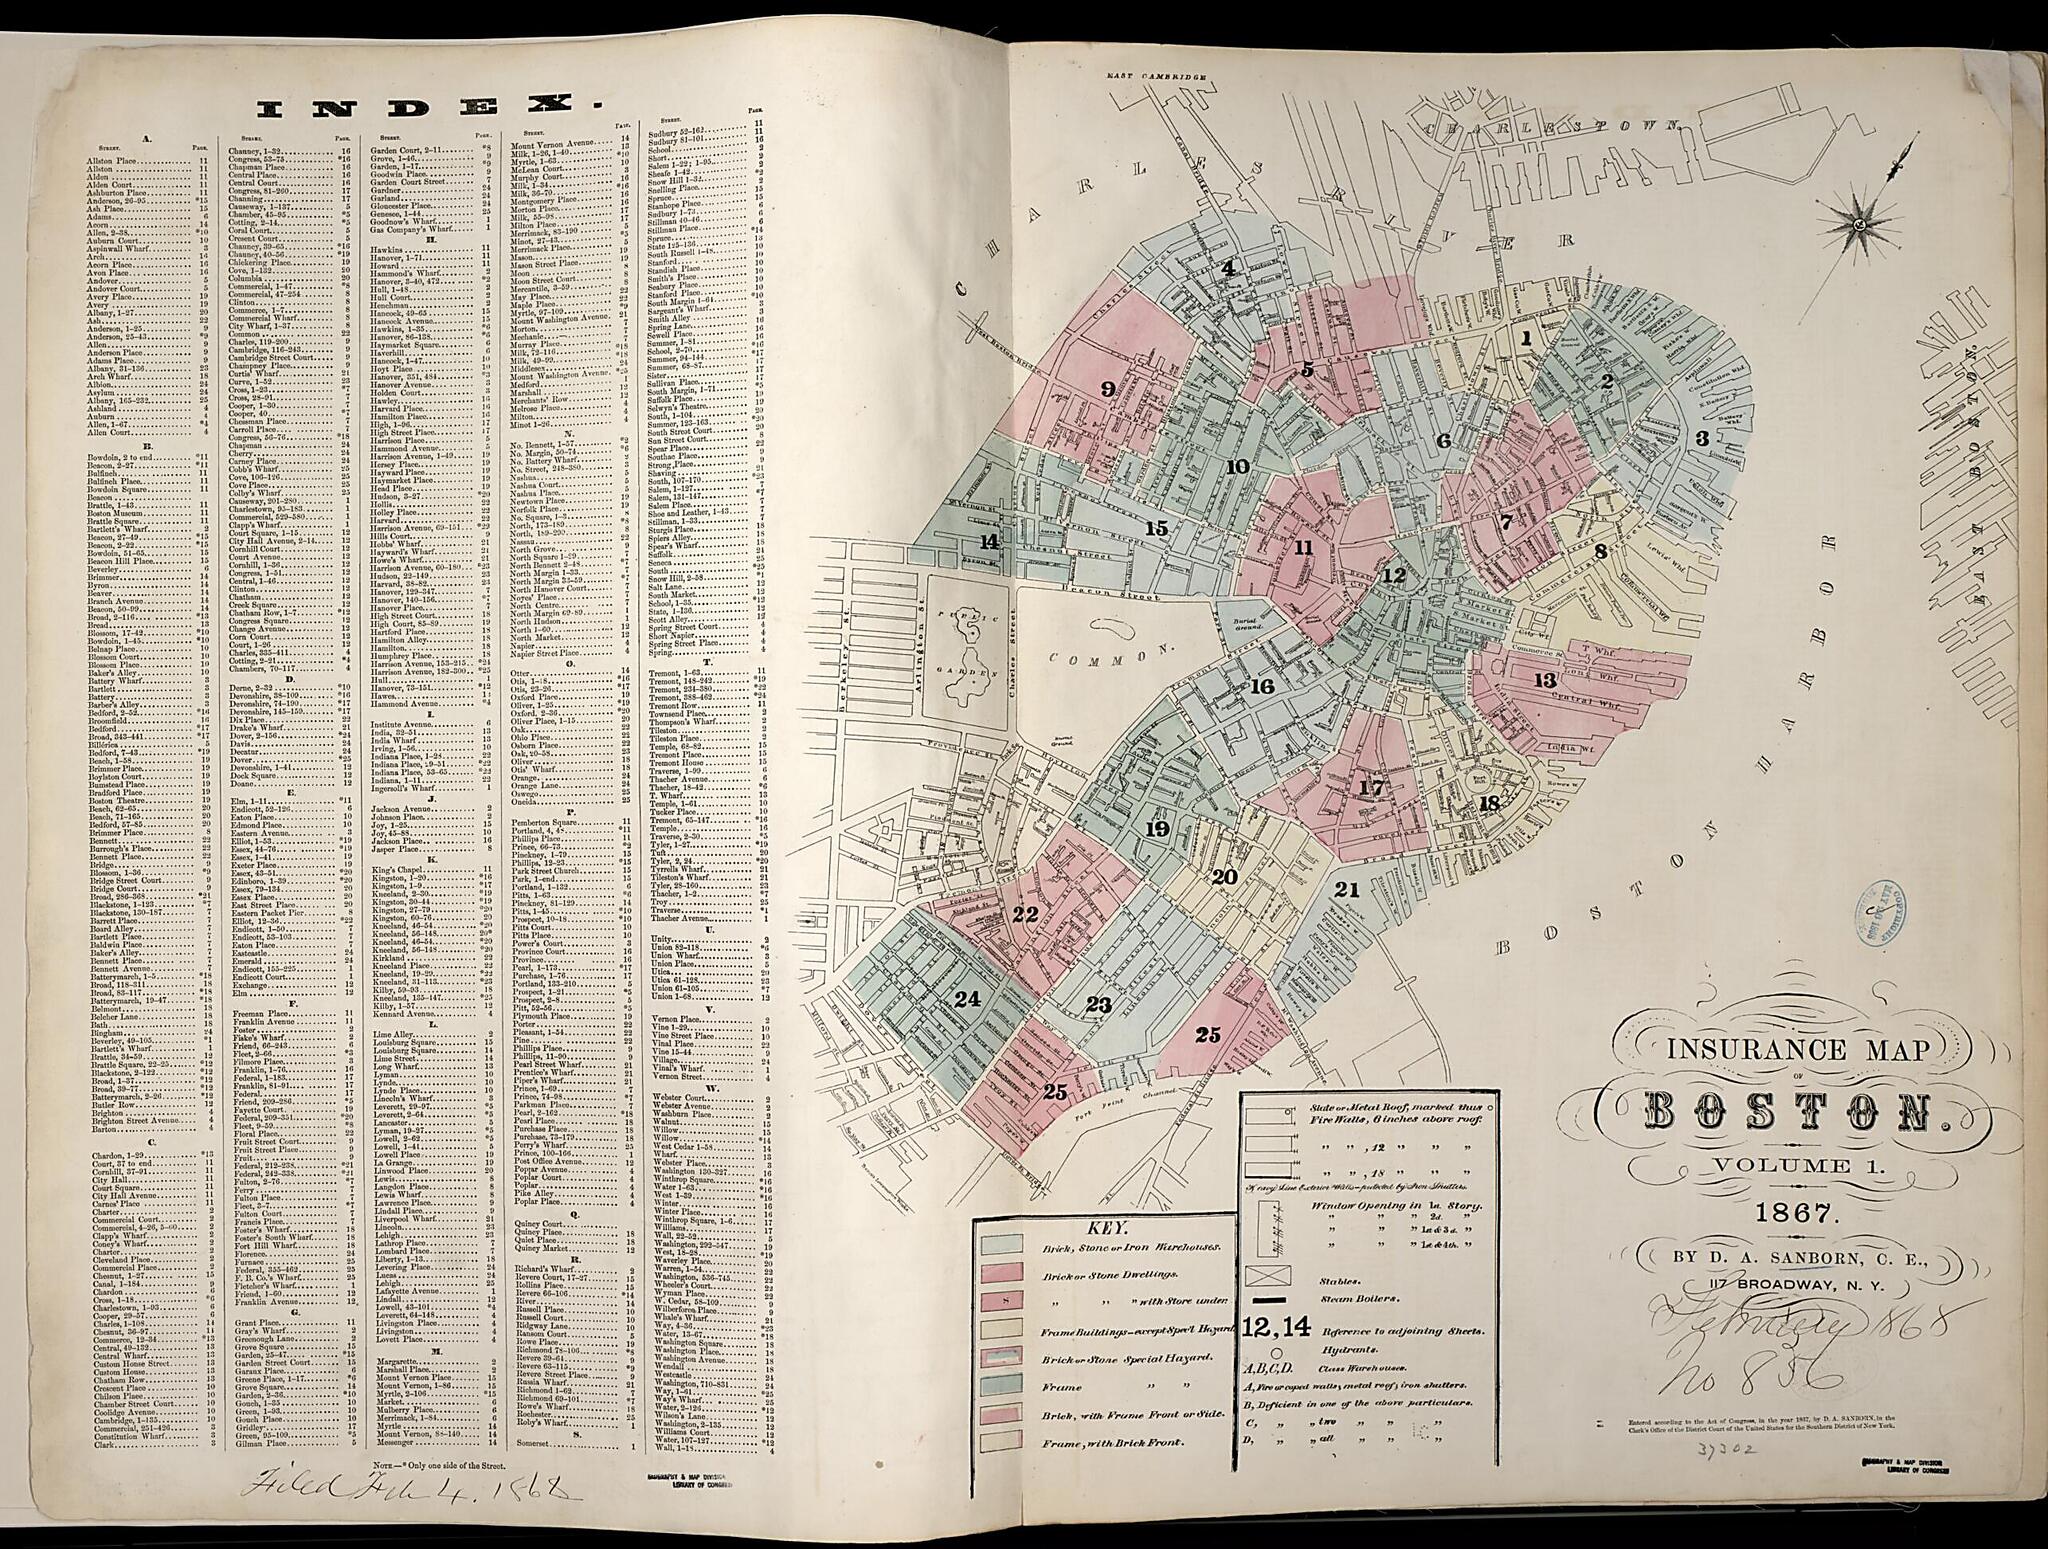 This old map of Insurance Map of Boston. Volume 1 from 1867 was created by D. A. (Daniel Alfred) Sanborn in 1867